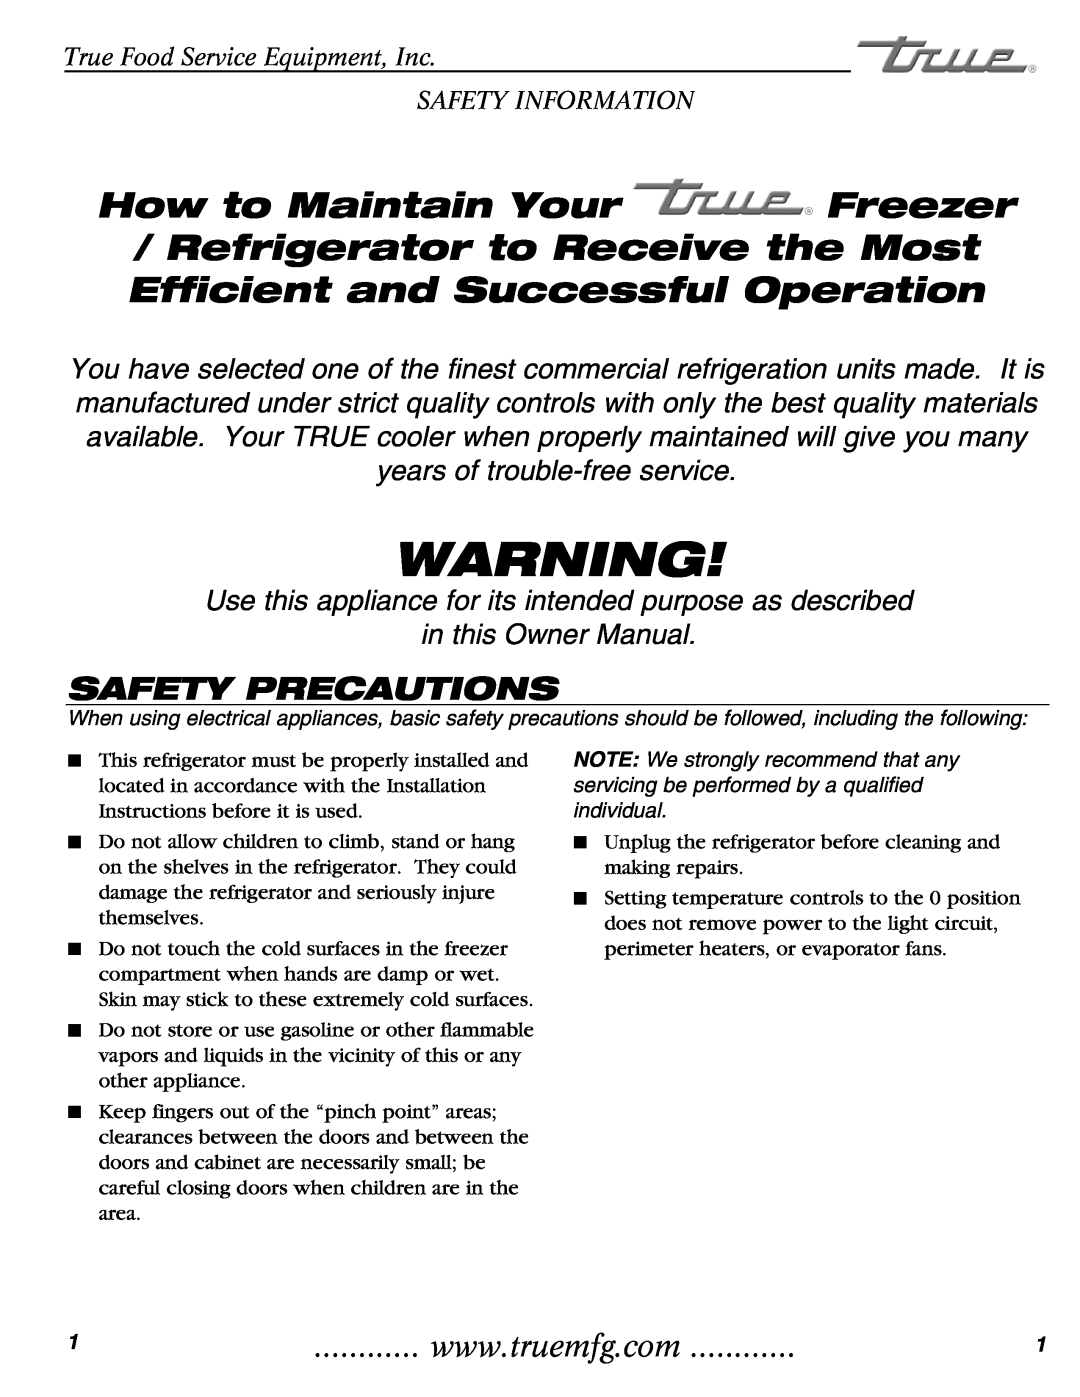 True Manufacturing Company T-35 installation manual Safety Precautions, How to Maintain Your Freezer 